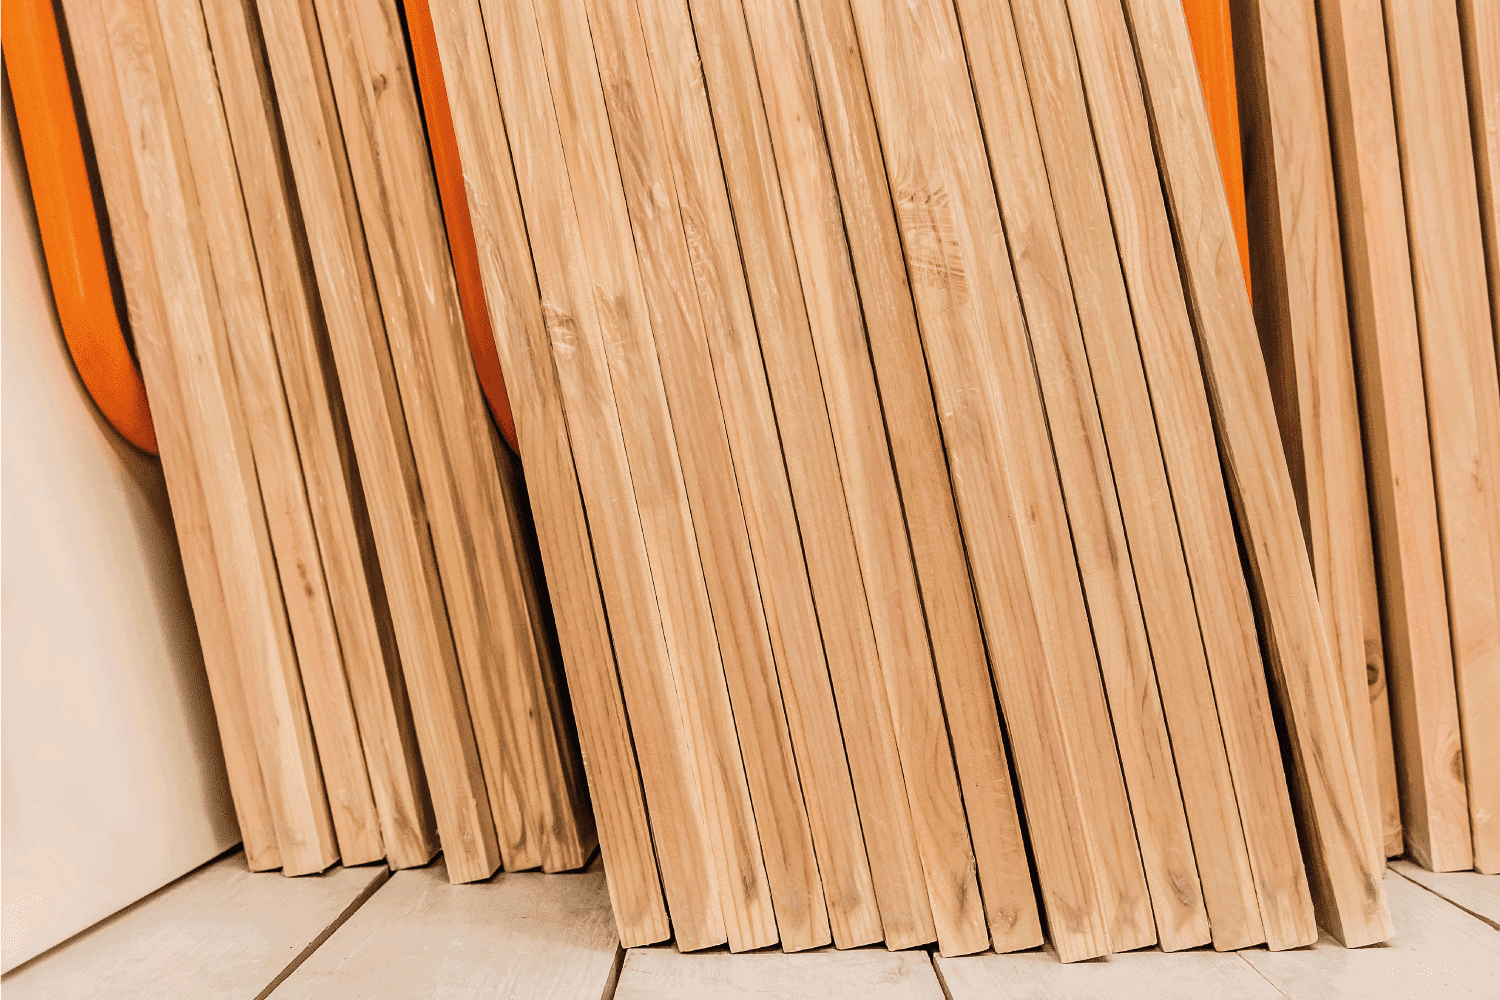 Assortment of wood panels in a hardware store, building materials, boards